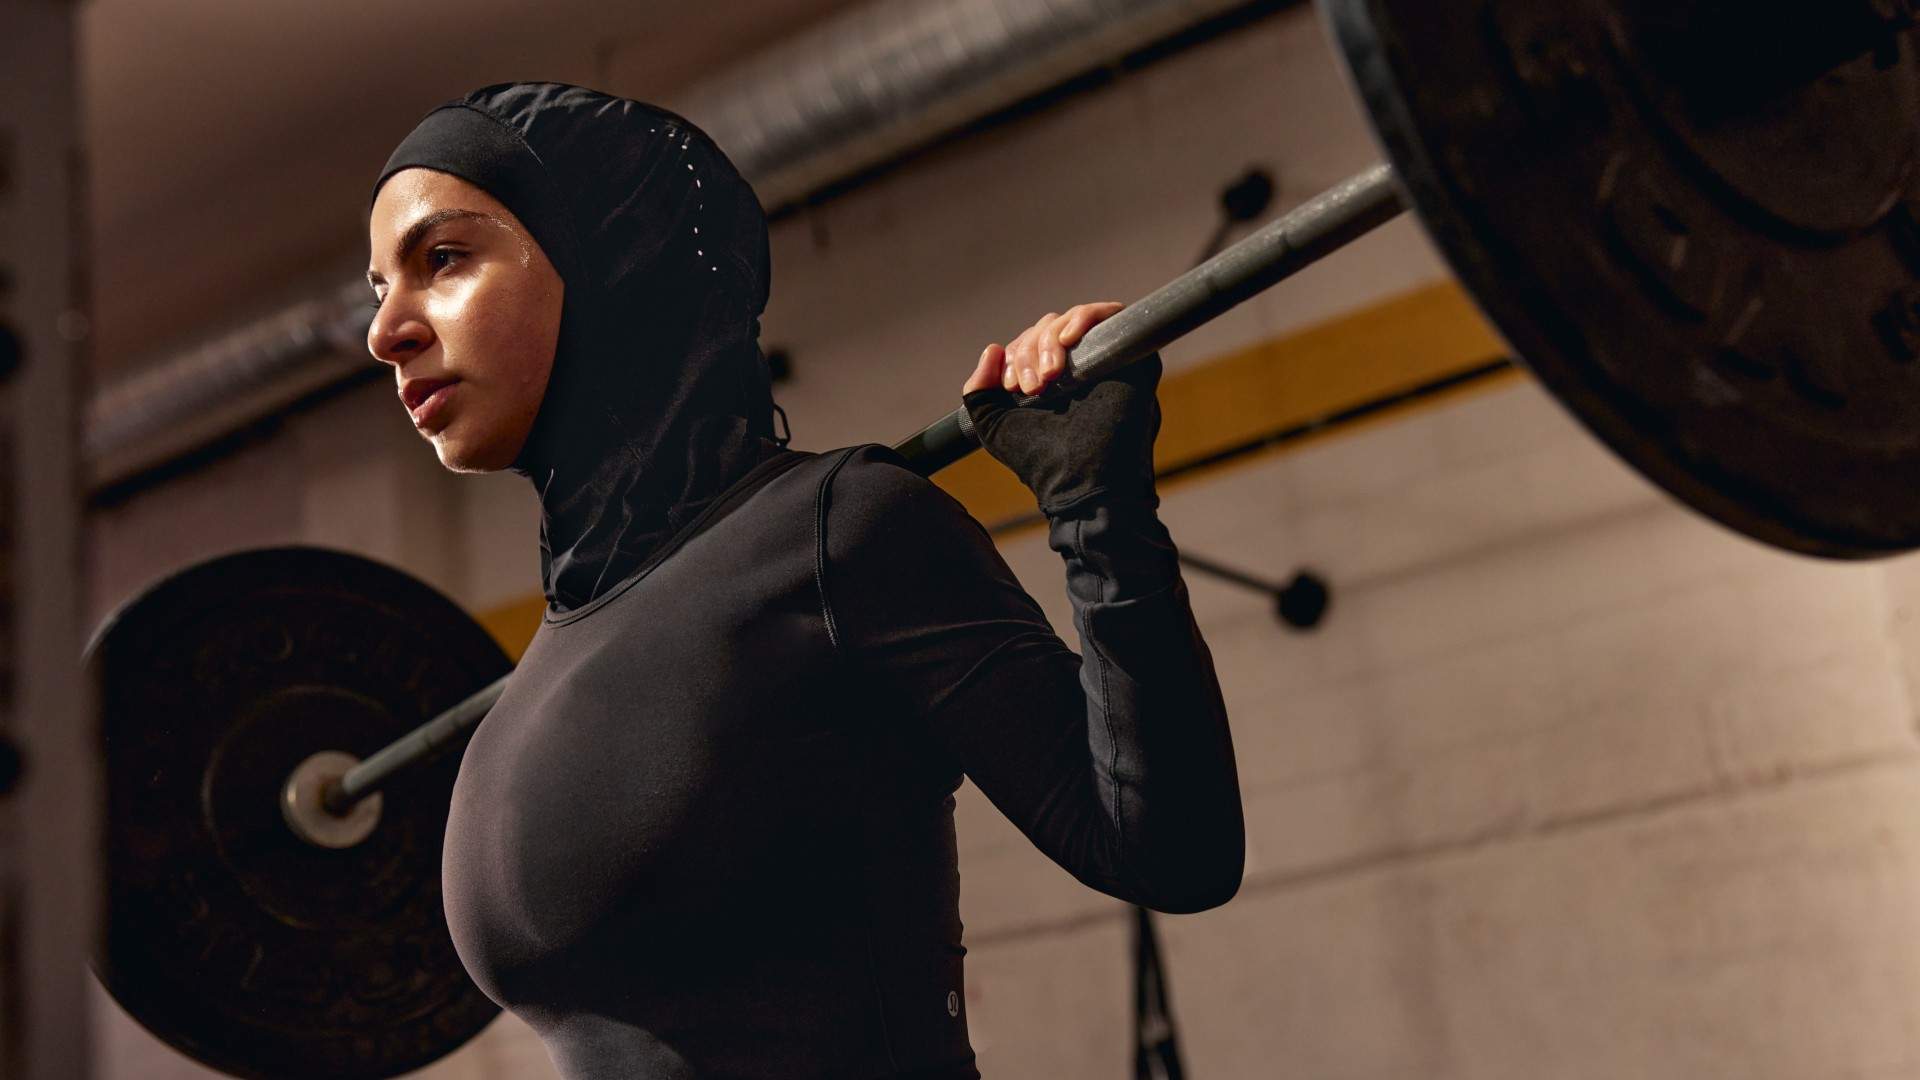 Lululemon Has Just Launched a New Range of Breathable Workout Hijabs